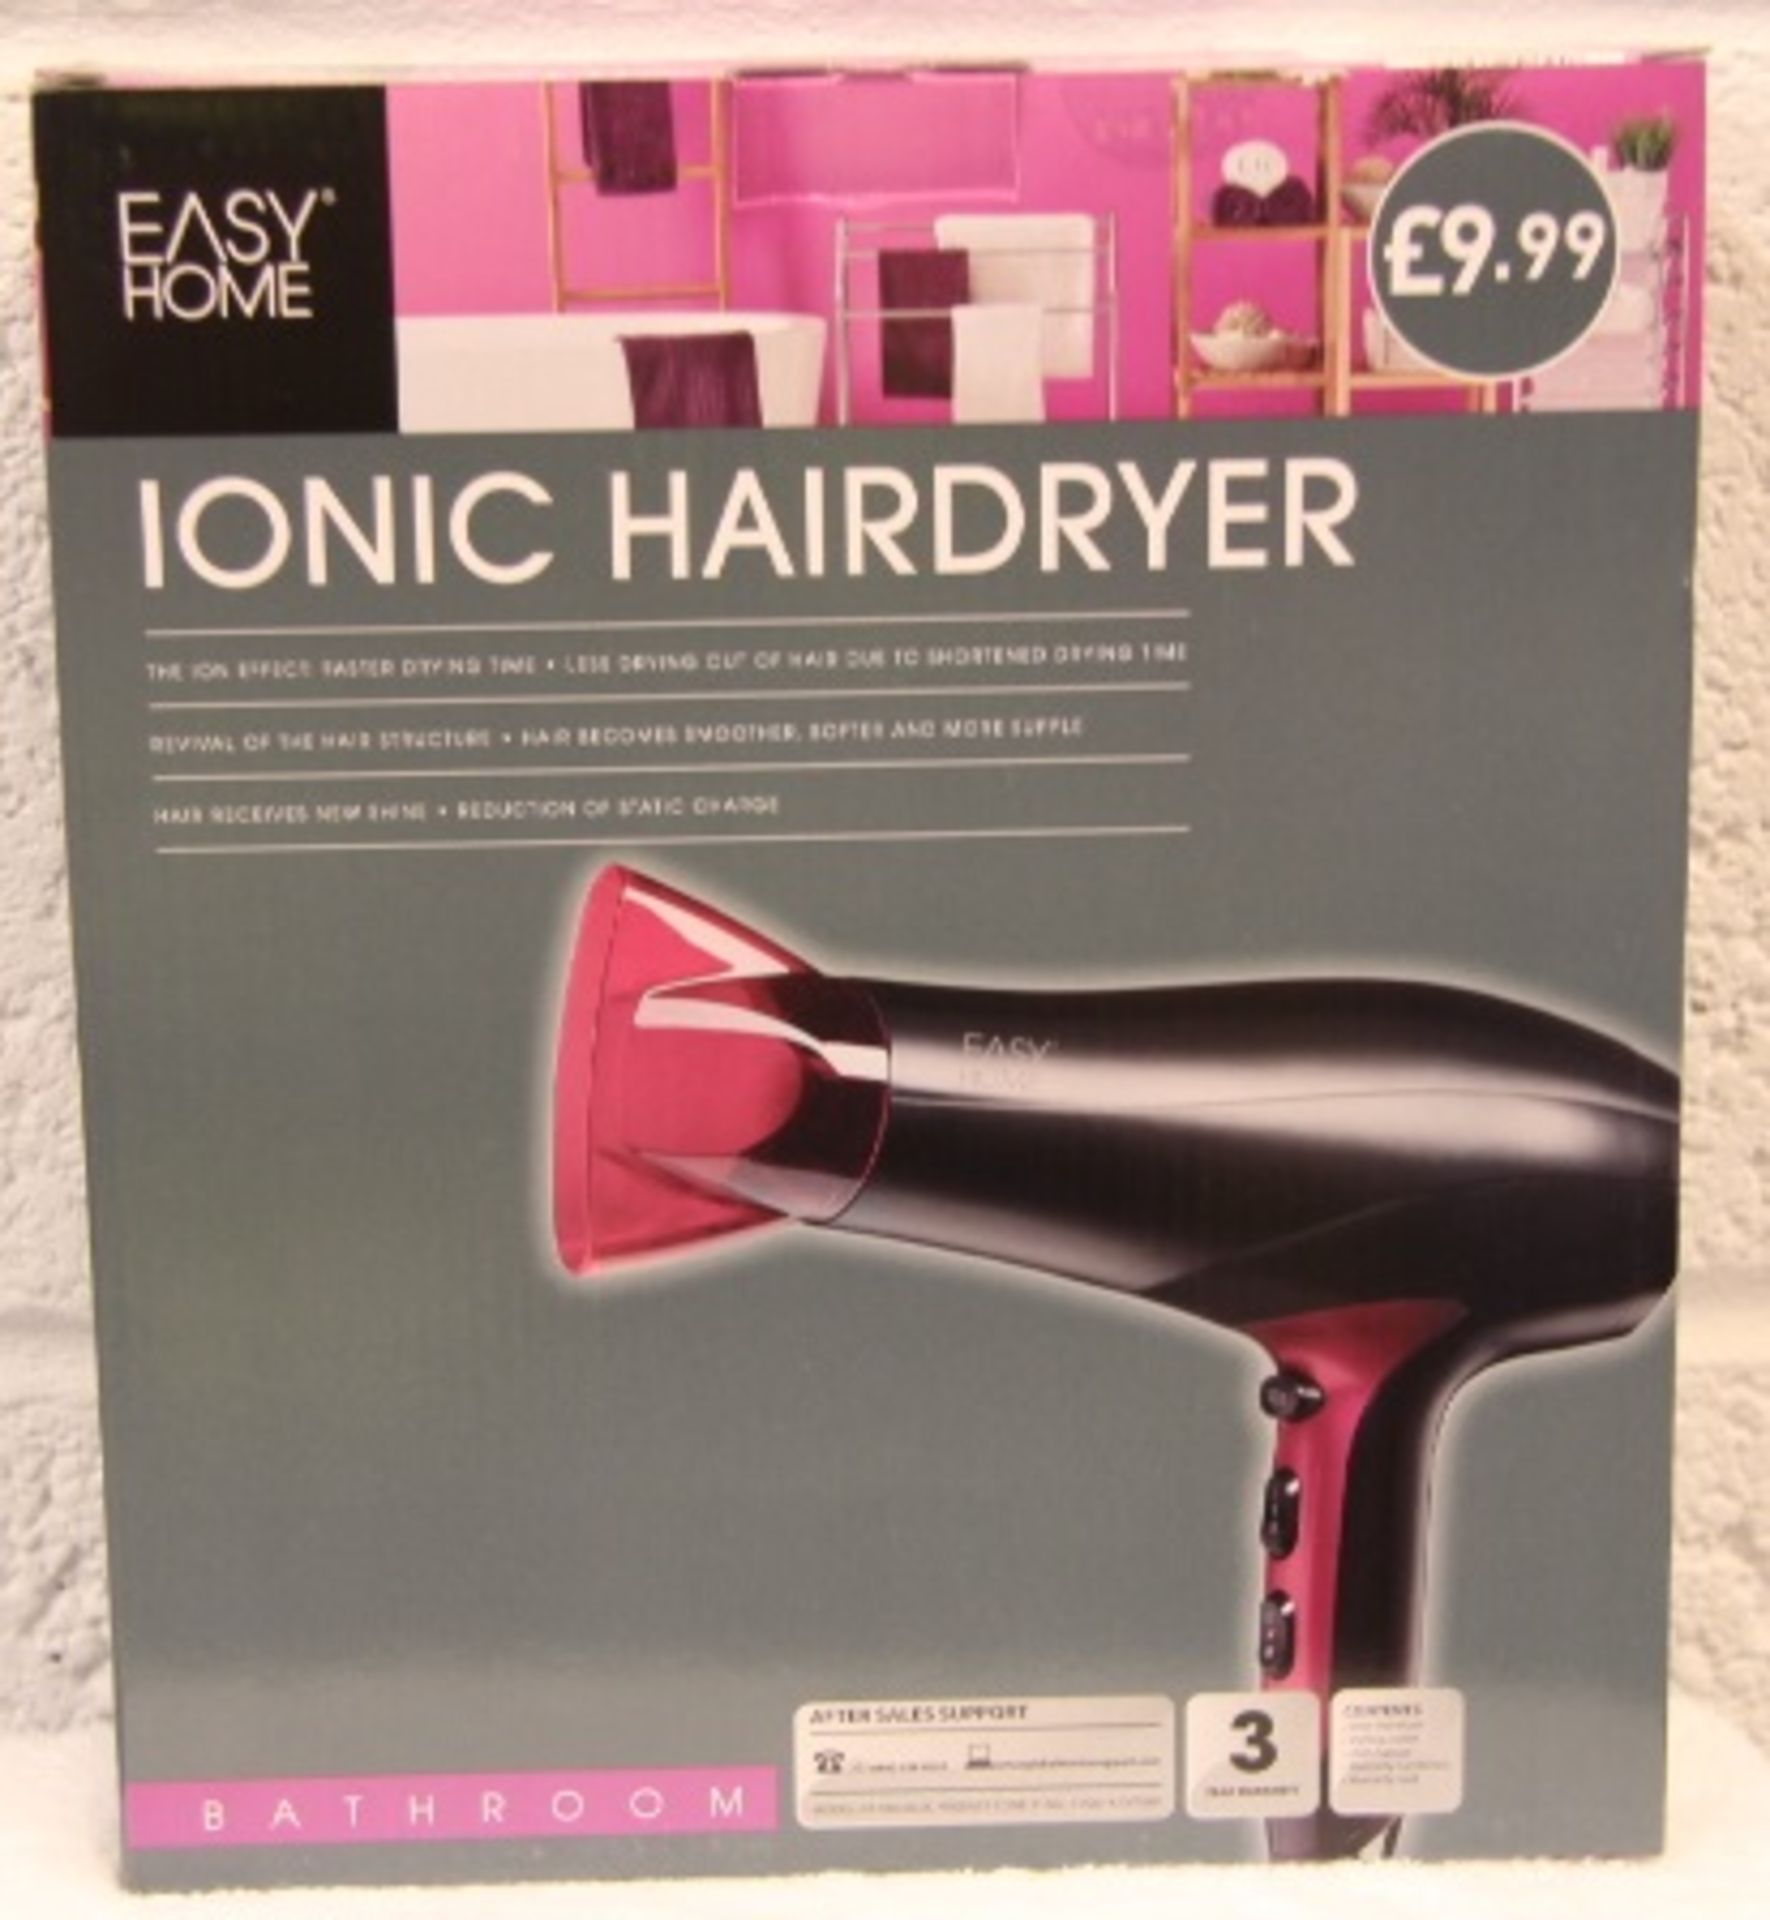 V *TRADE QTY* Brand New Easy Home Ionic Hairdryer-Faster Drying-Revival Of The Hair Structure X 42